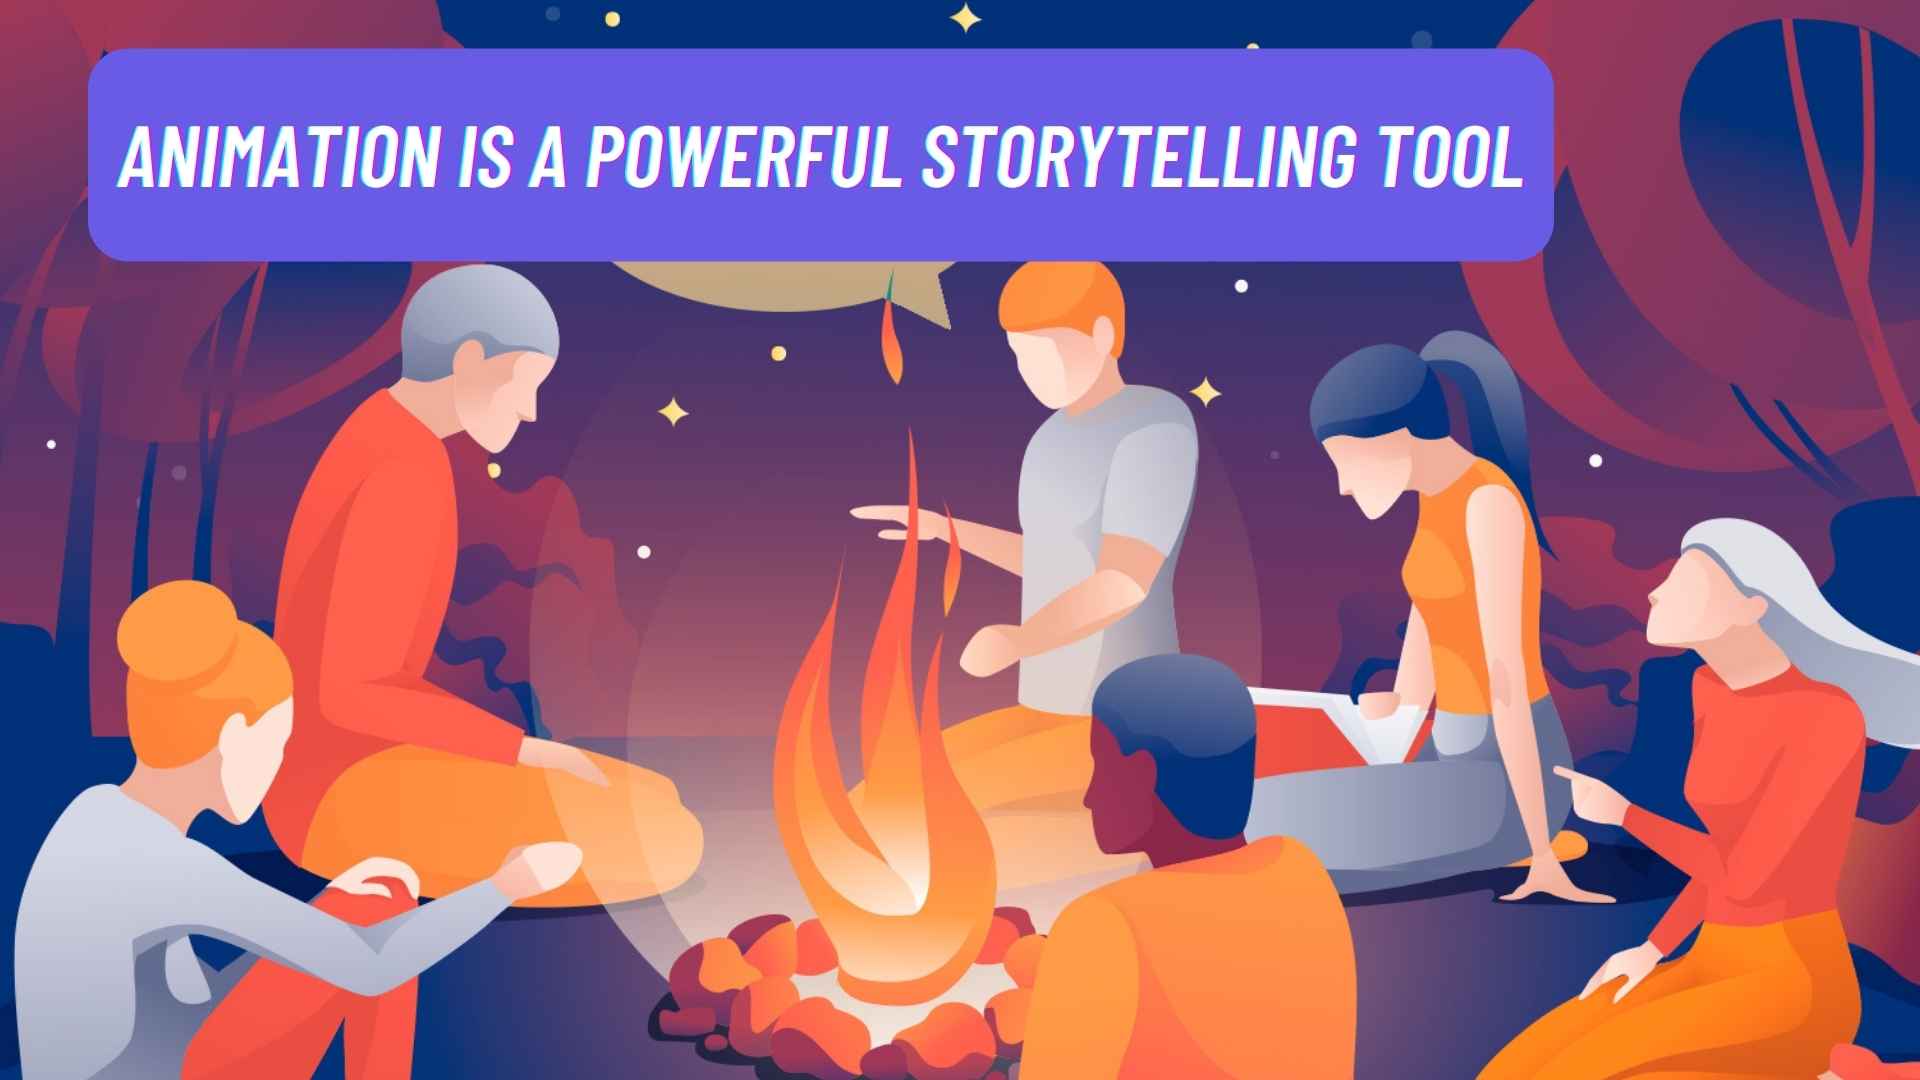 Why is animated video a powerful storytelling tool?